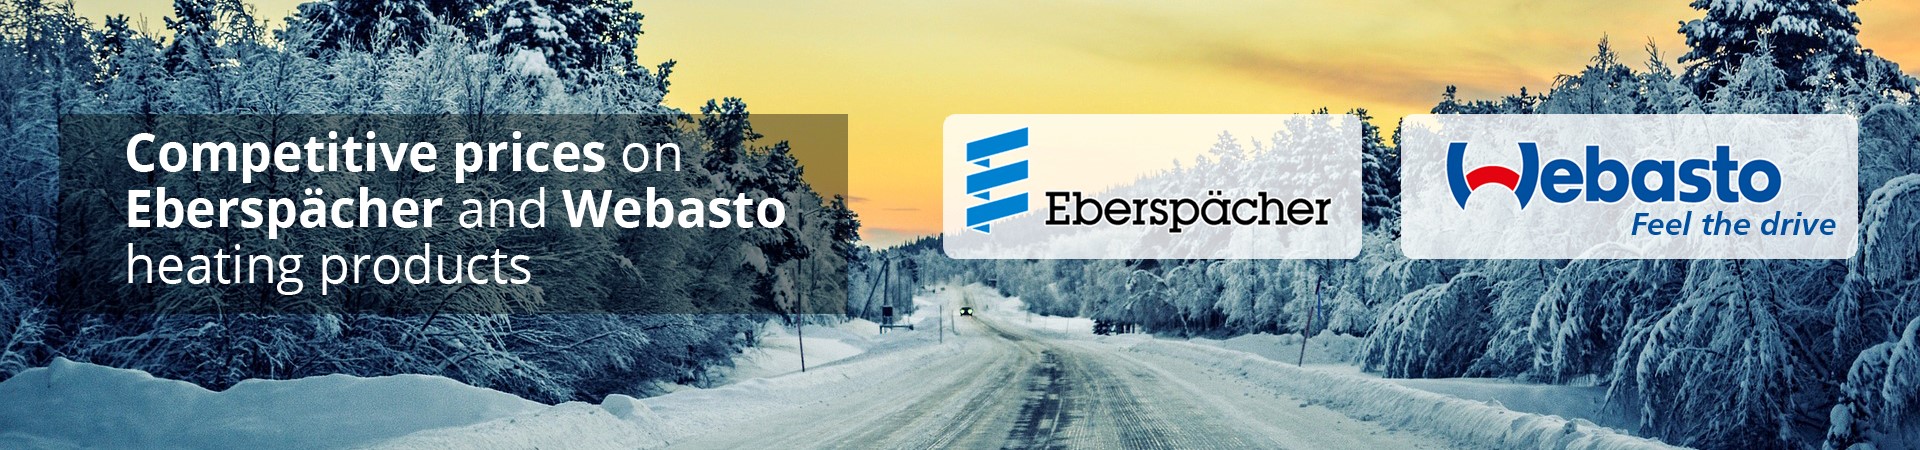 Competitive Prices on Eberspacher and Webasto